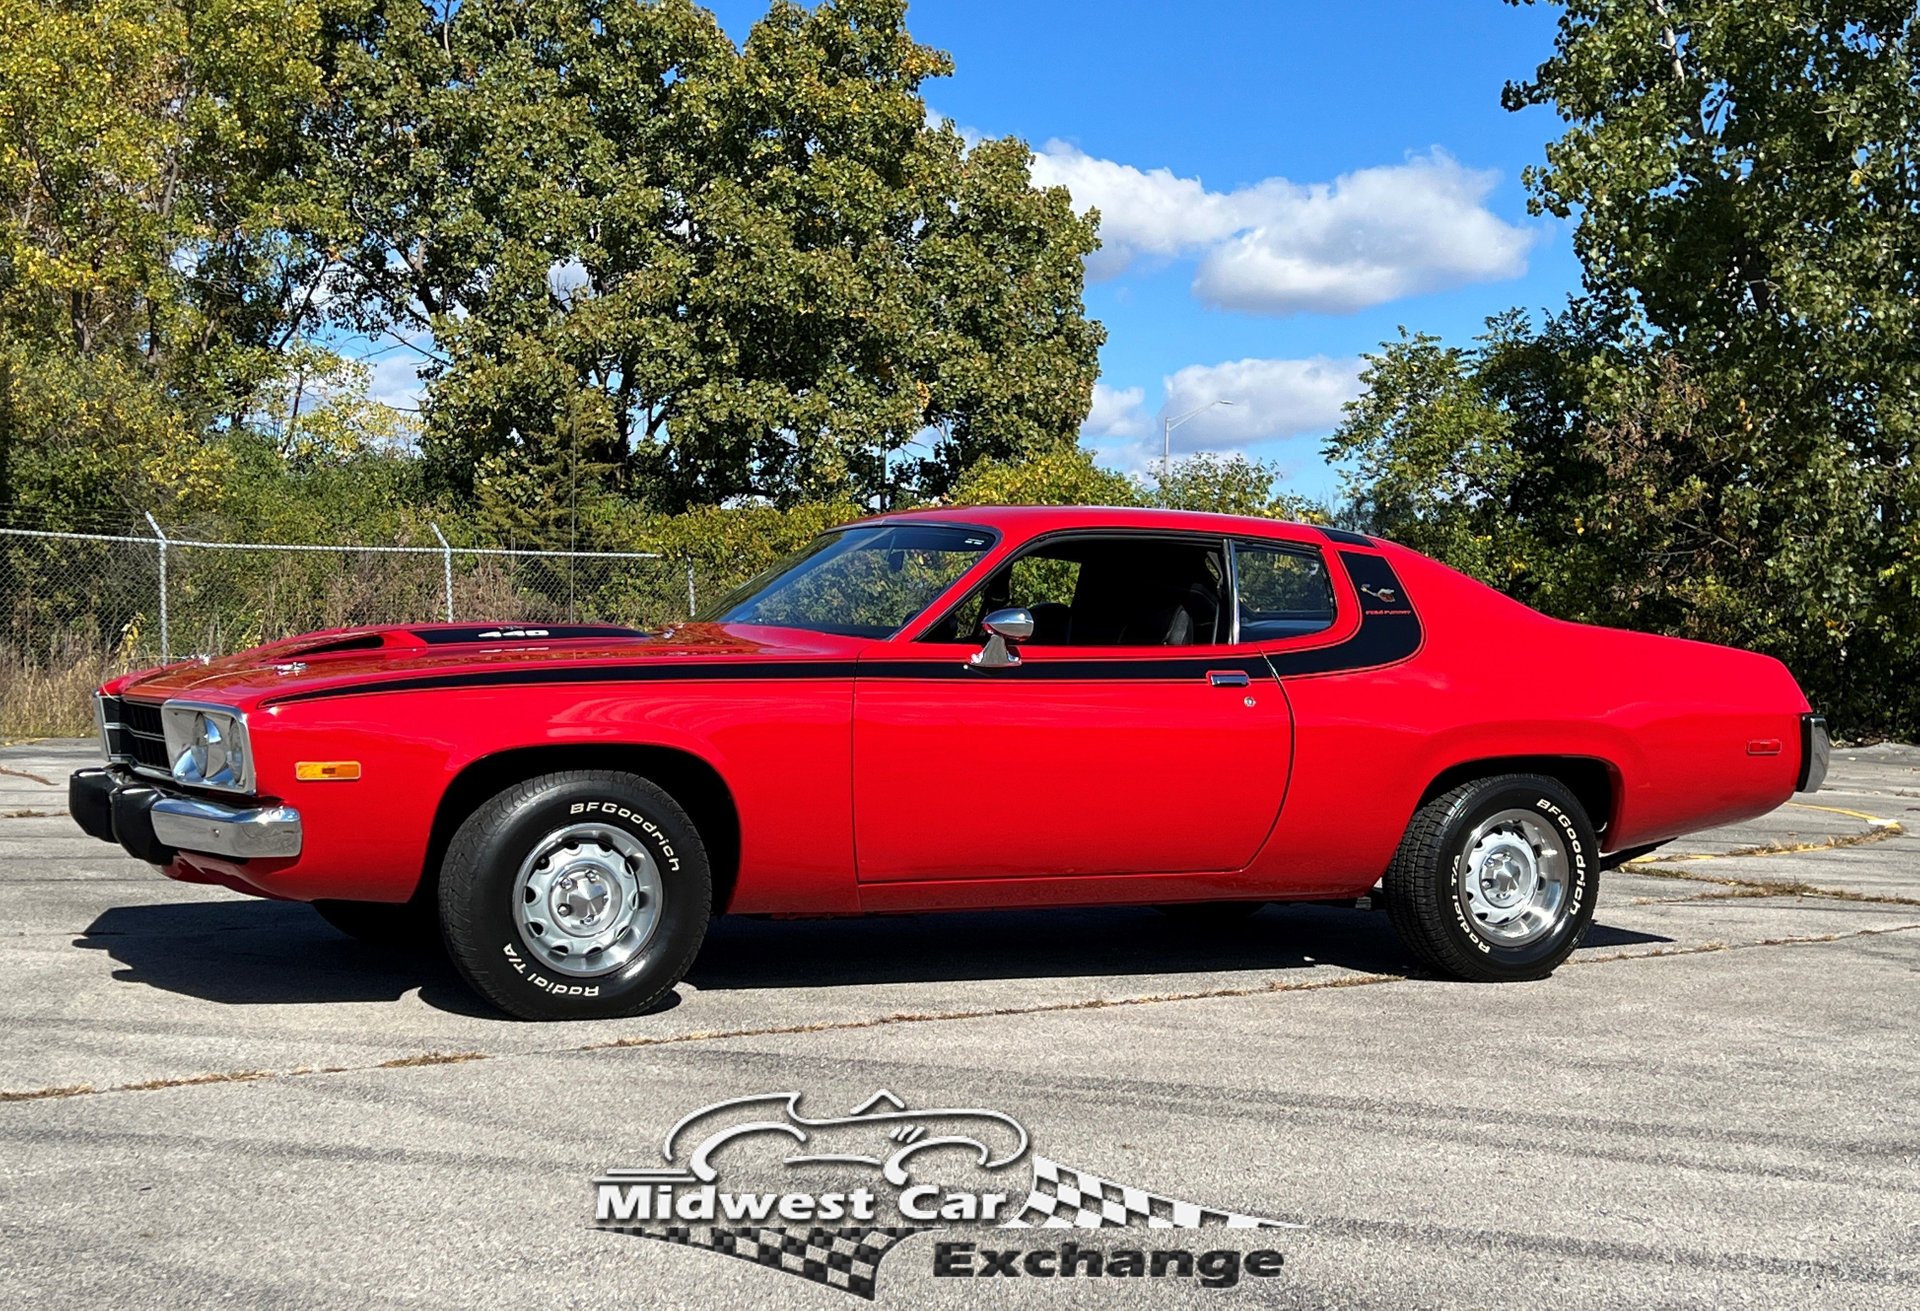 1974 Plymouth Roadrunner | Midwest Car Exchange